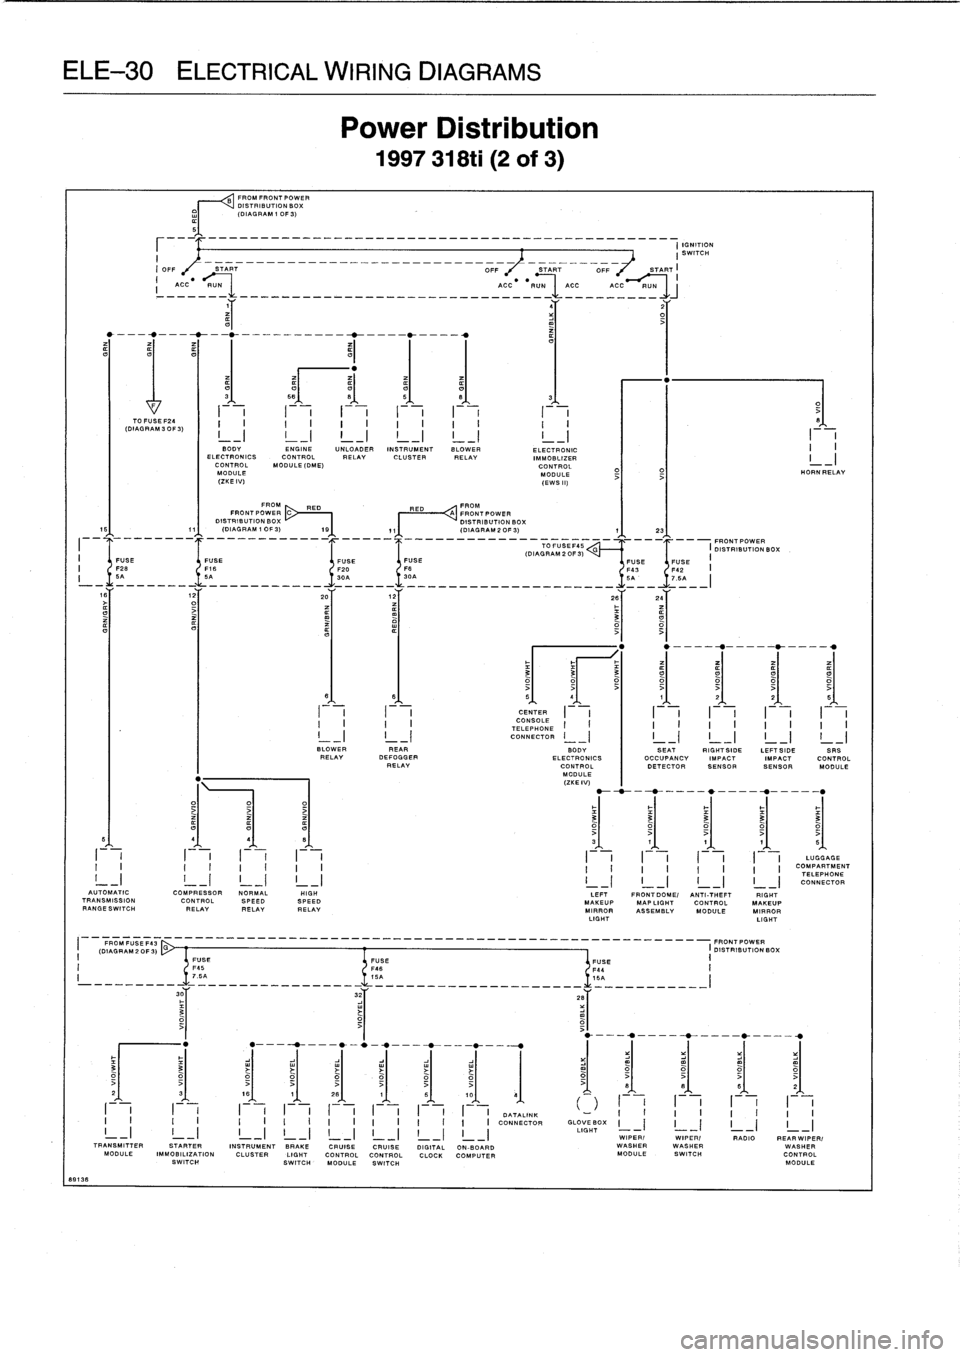 BMW 328i 1995 E36 Service Manual 
ELE-30
ELECTRICAL
WIRING
DIAGRAMS

I
ACC
-R=_
____-____-______________
ACC
-
RUN

	

ACC
-_-C~

4Y

	

2Y

I

	

I

TO
FUSE
F24
(DIAGRAM
30F
3)

FROM
FRONT
POWER
DISTRIBUTION
BOX
(DIAGRAM
1
0F3)
IGNI